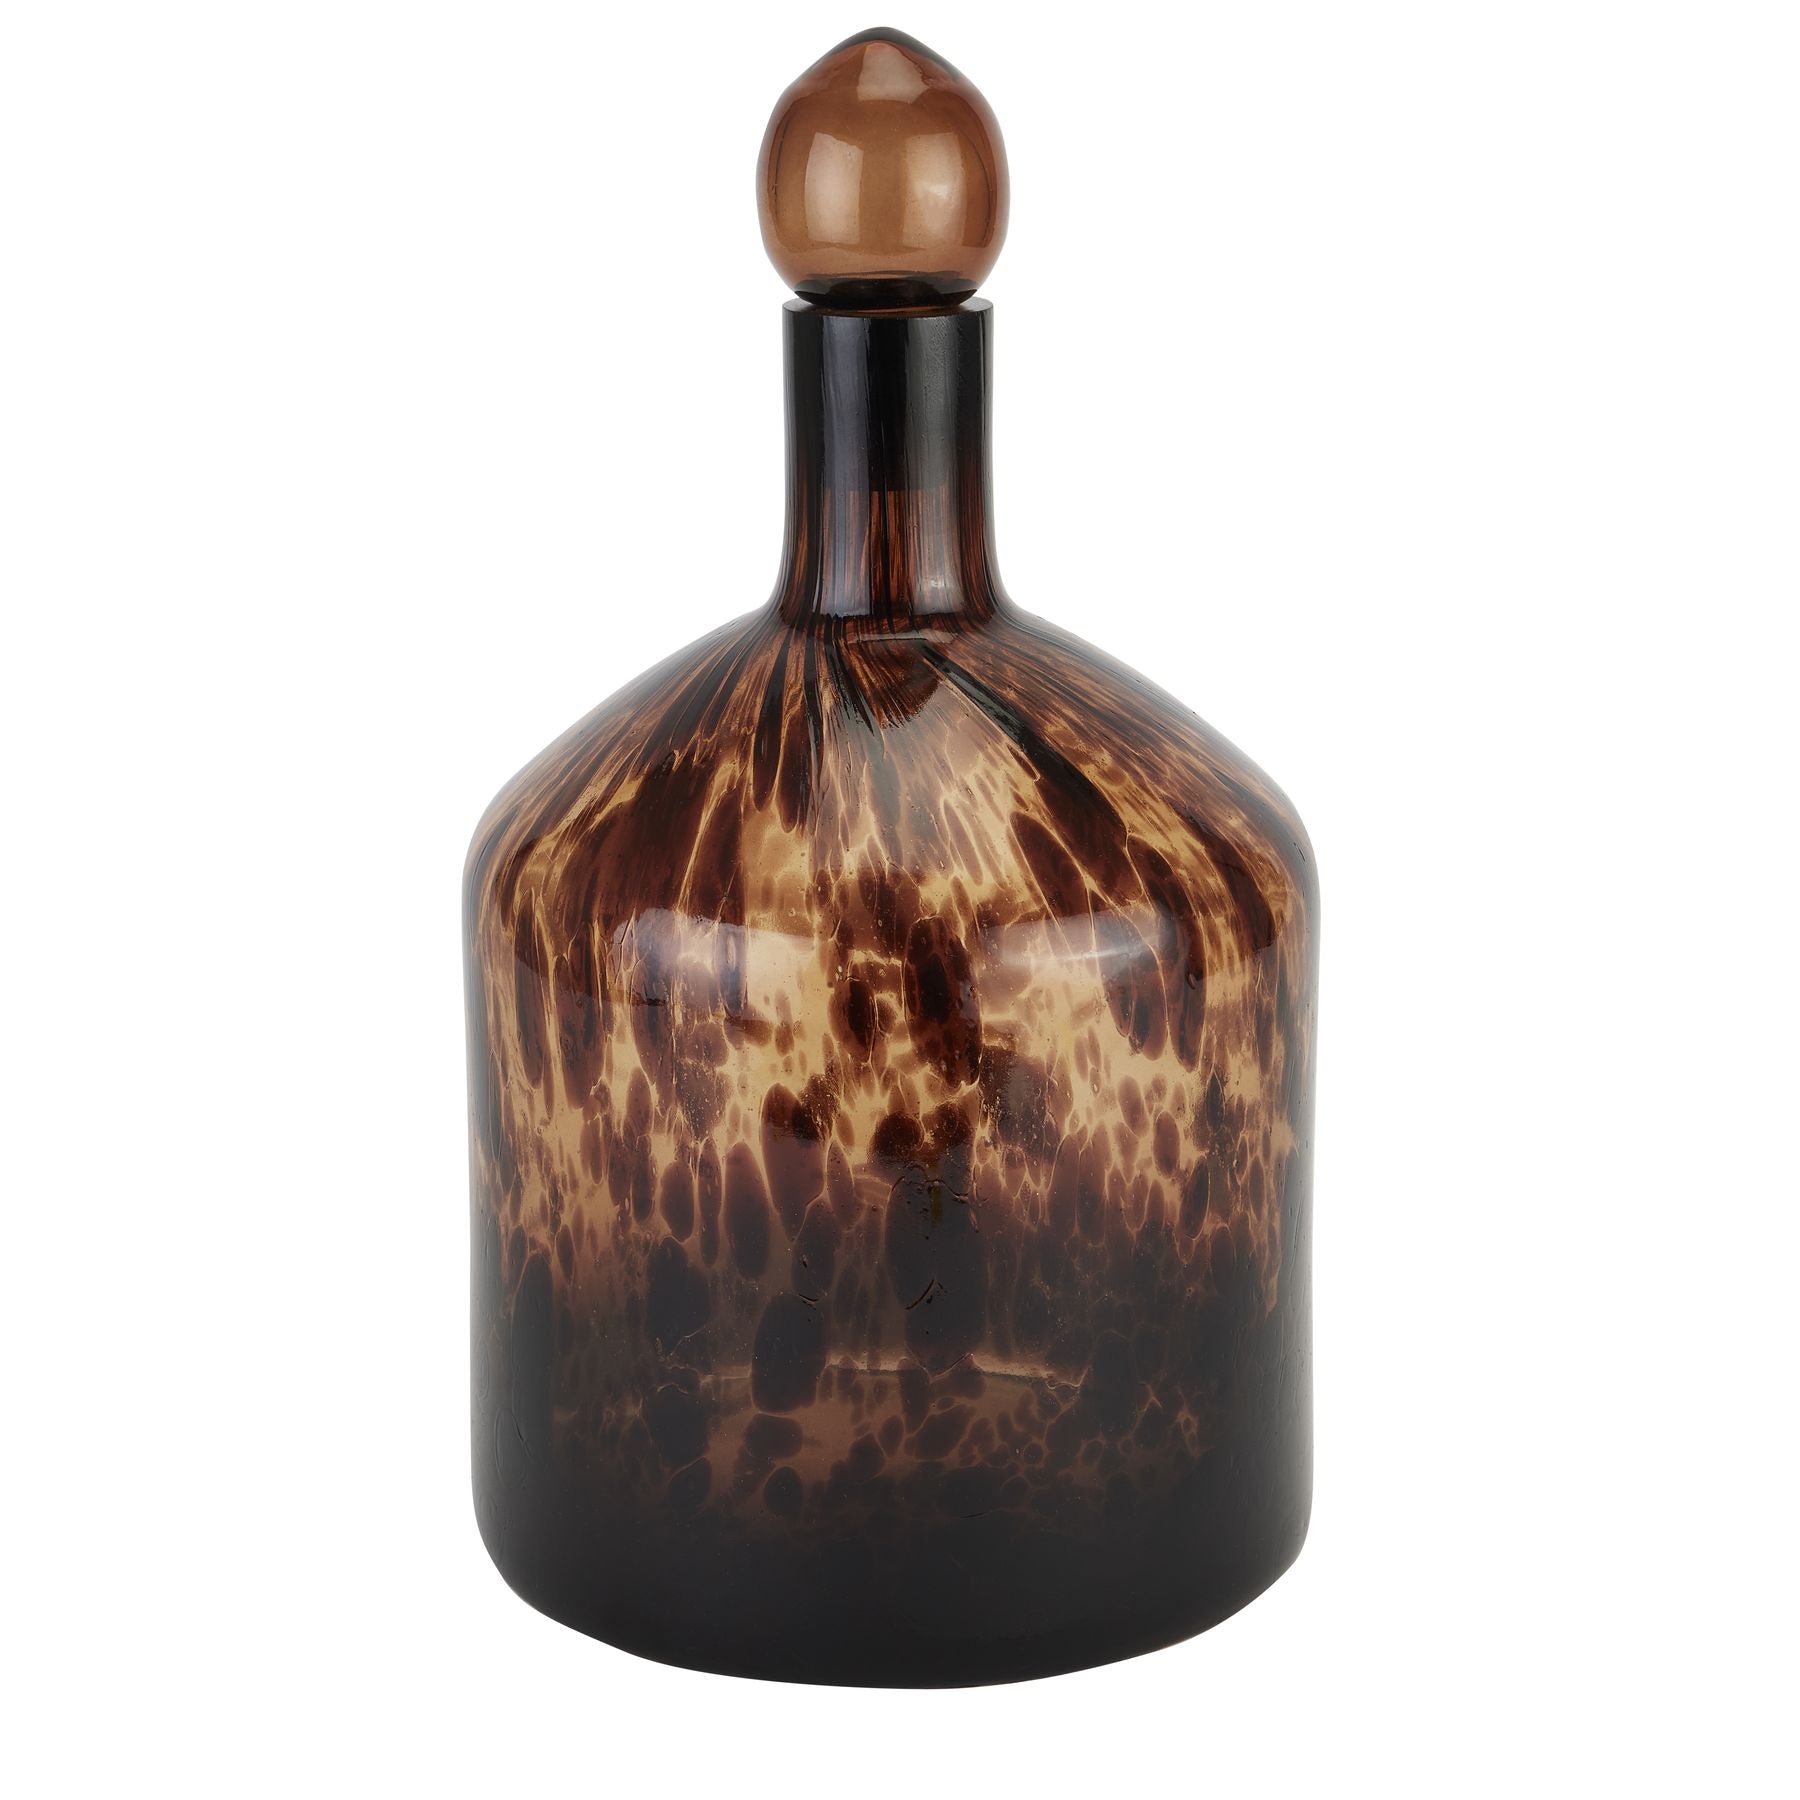 View Amber Dapple Bottle With Stopper information